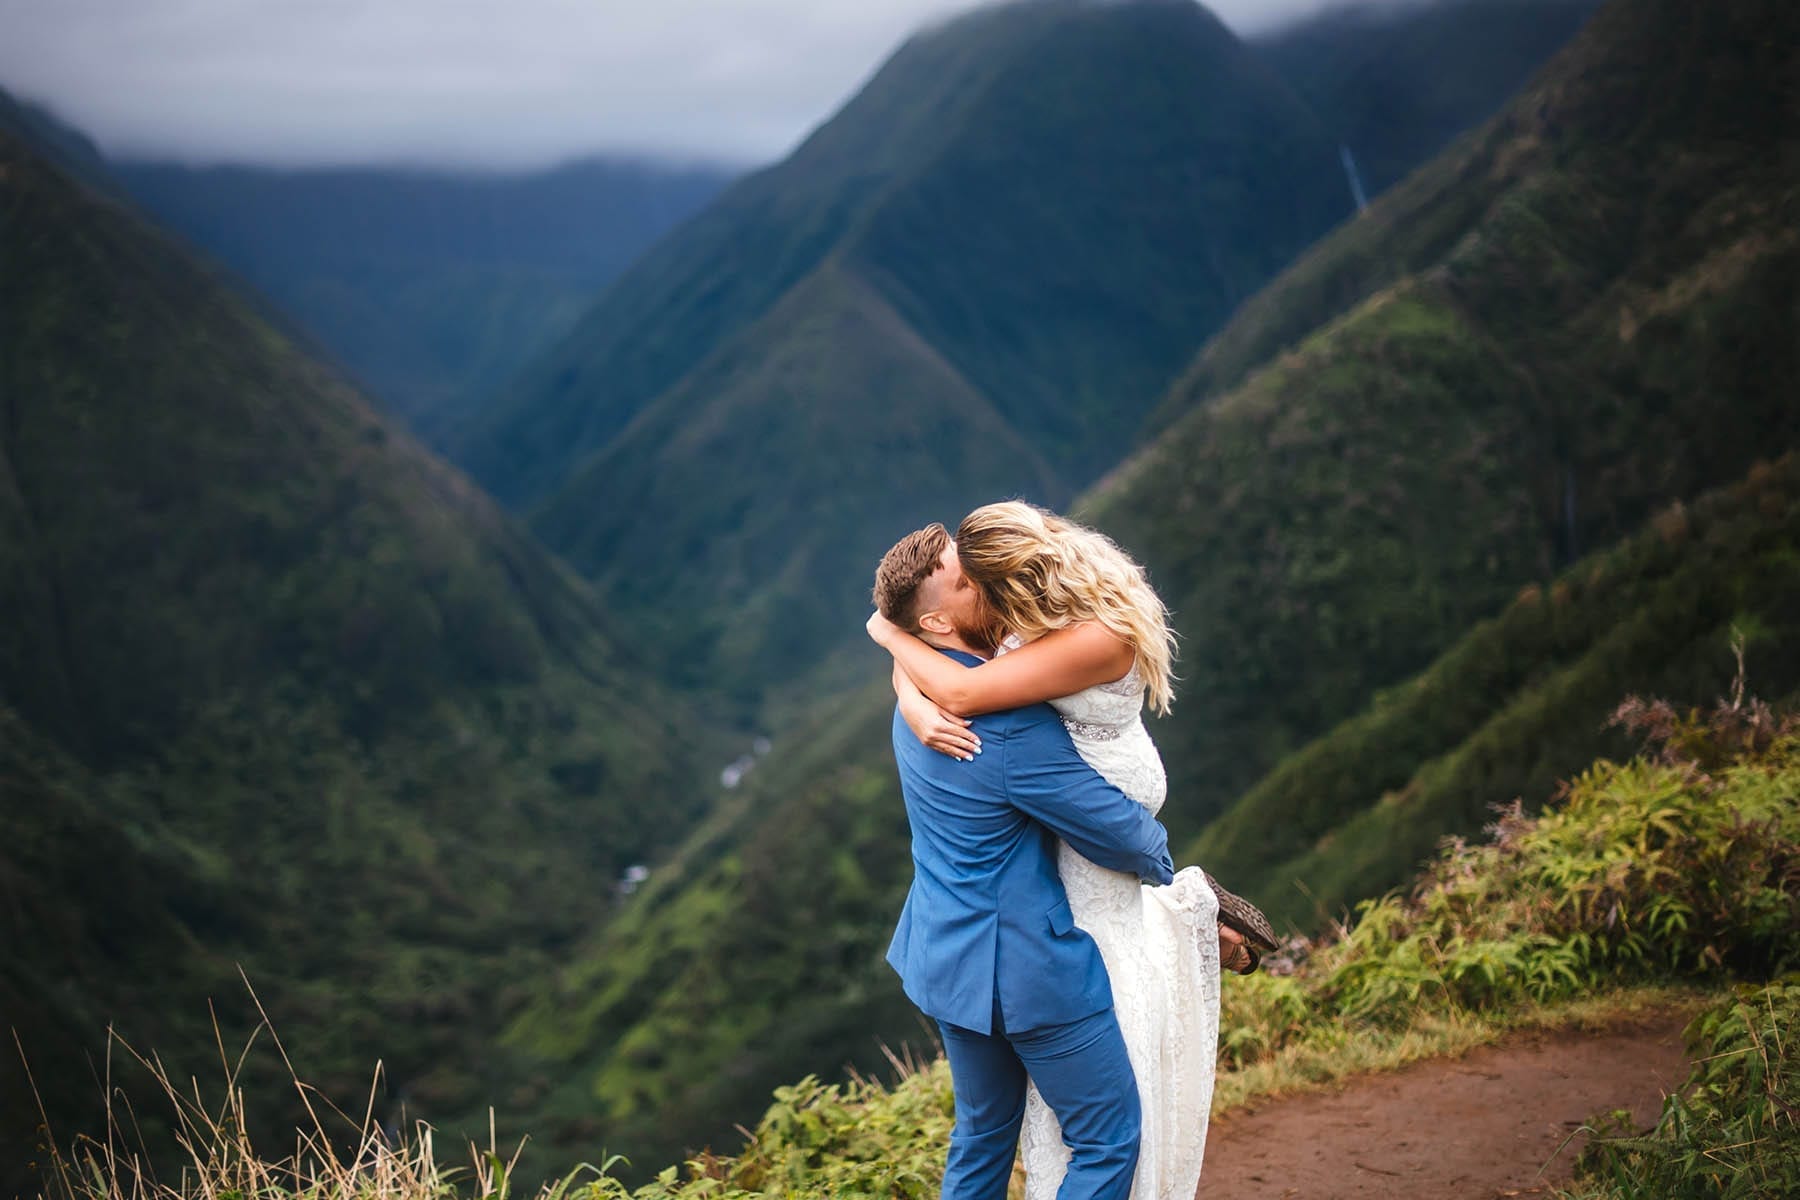 Best locations to get married in Maui Hawaii